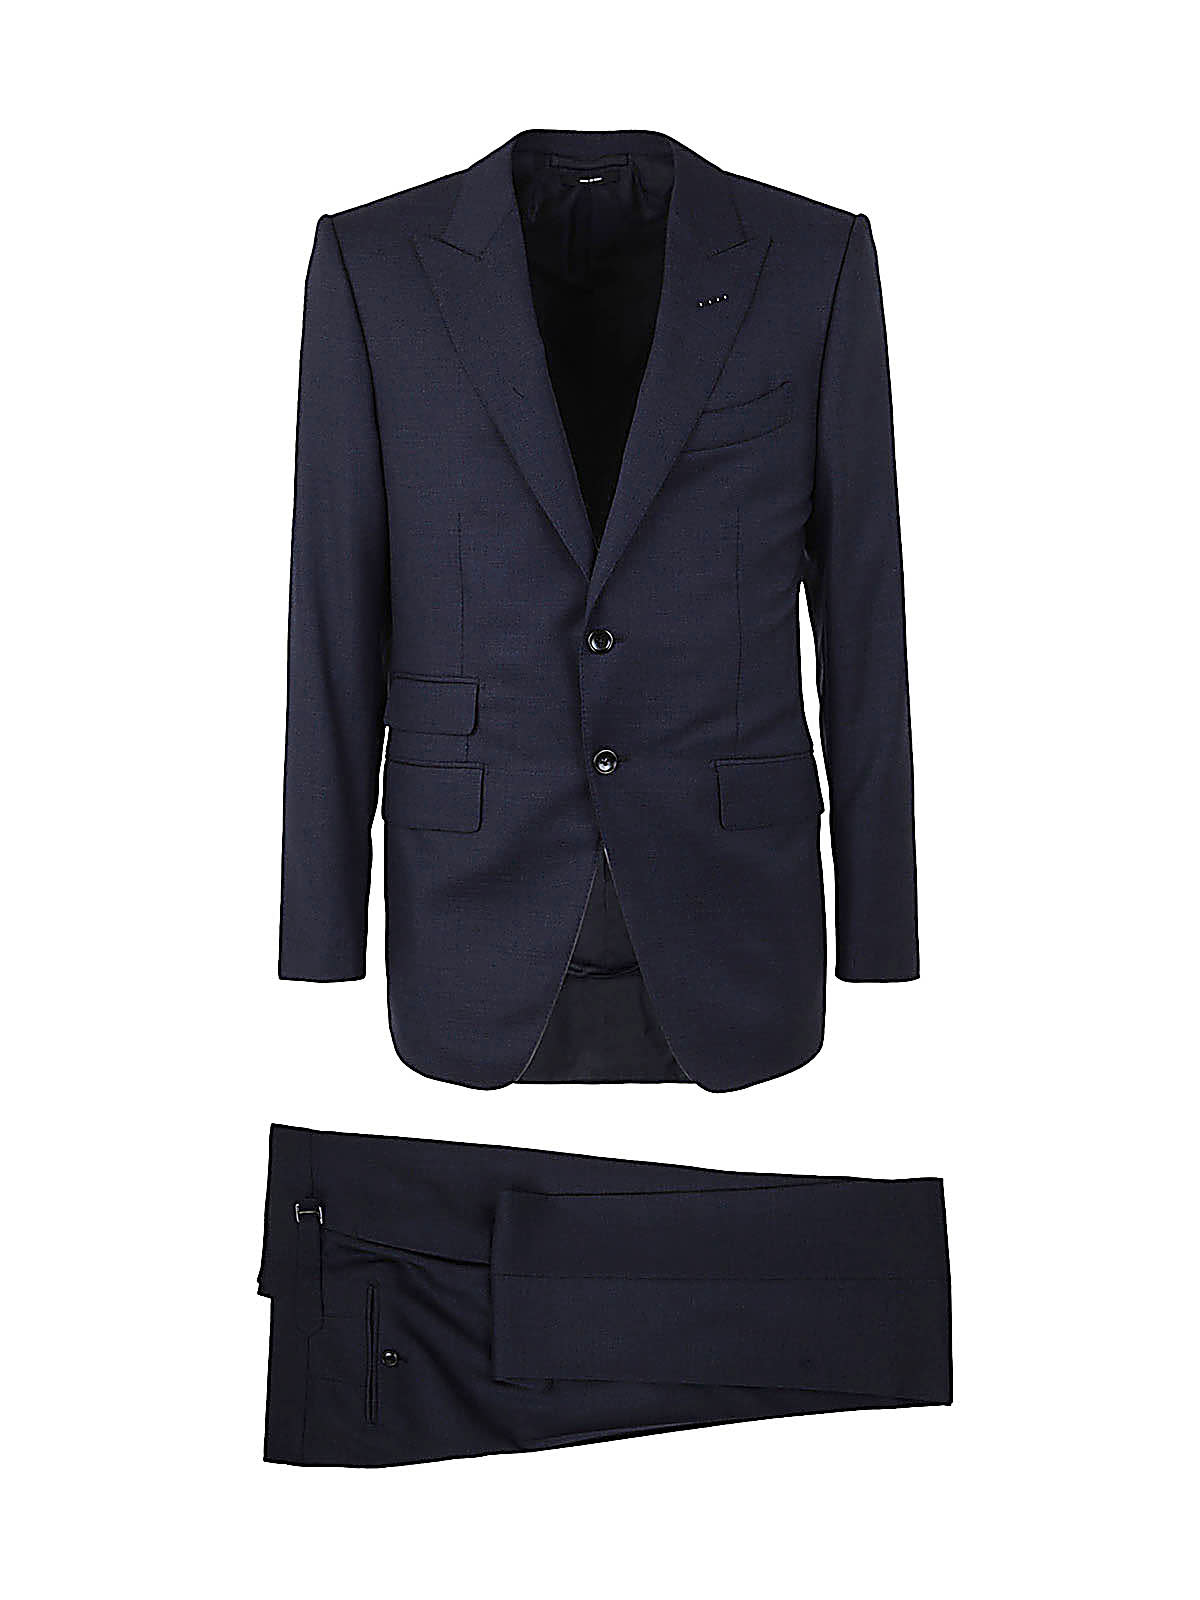 TOM FORD MICRO STRUCTURE O CONNOR SUIT